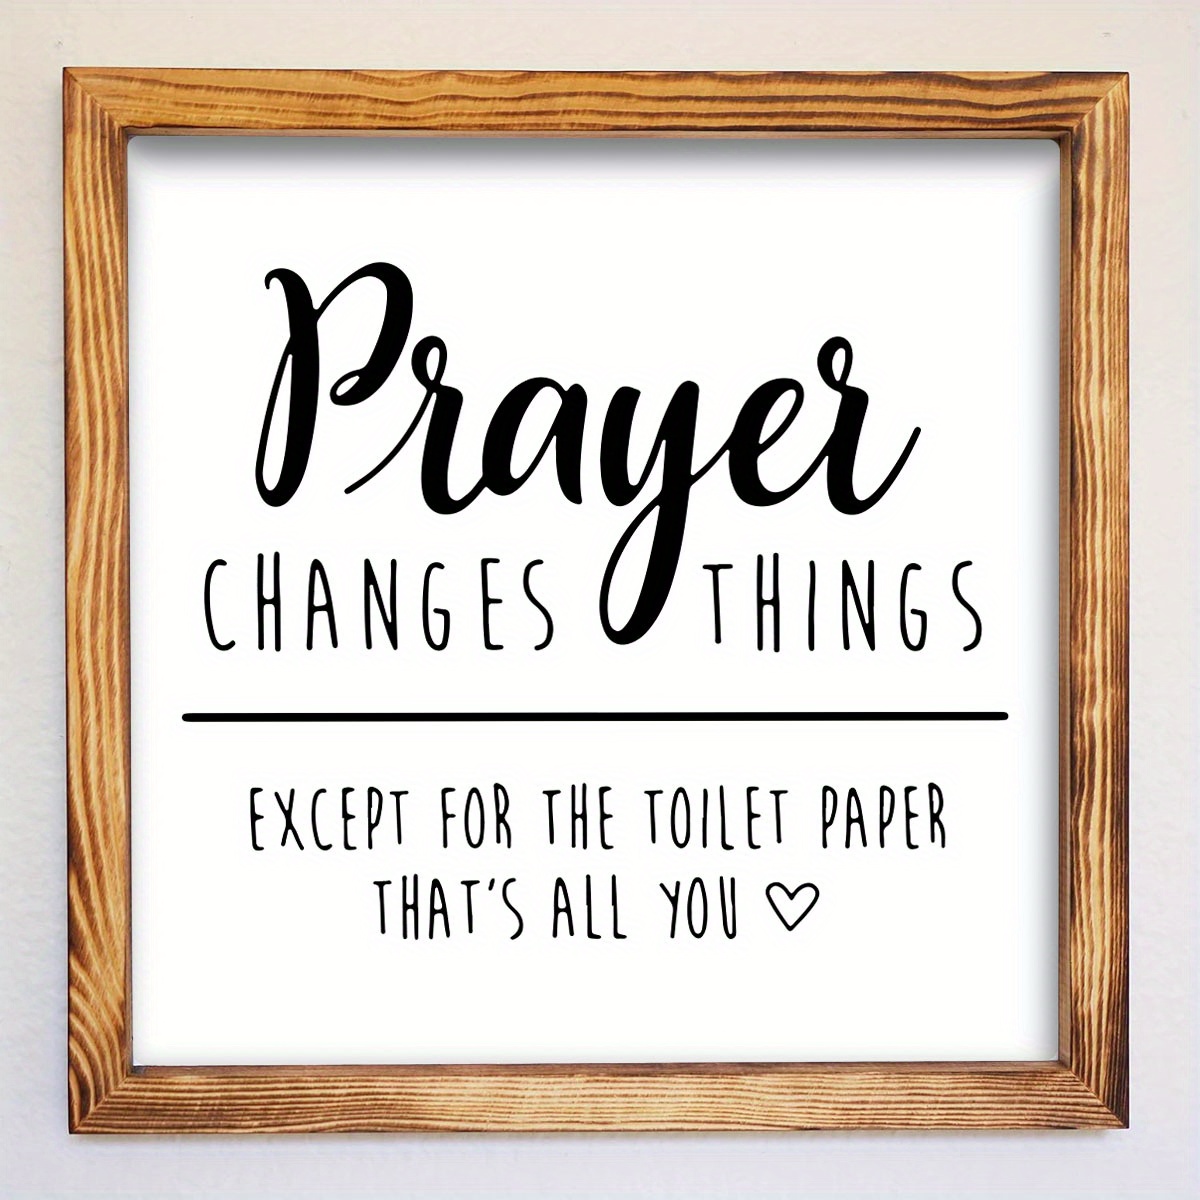 

1pc, Wood Sign With Quotes Prayer Changes Things, Except For The Toilet Paper That's All On You Wood Frame Farmhouse Family Wall Art Decor Vintage Hanging Sign For Living Bathroom